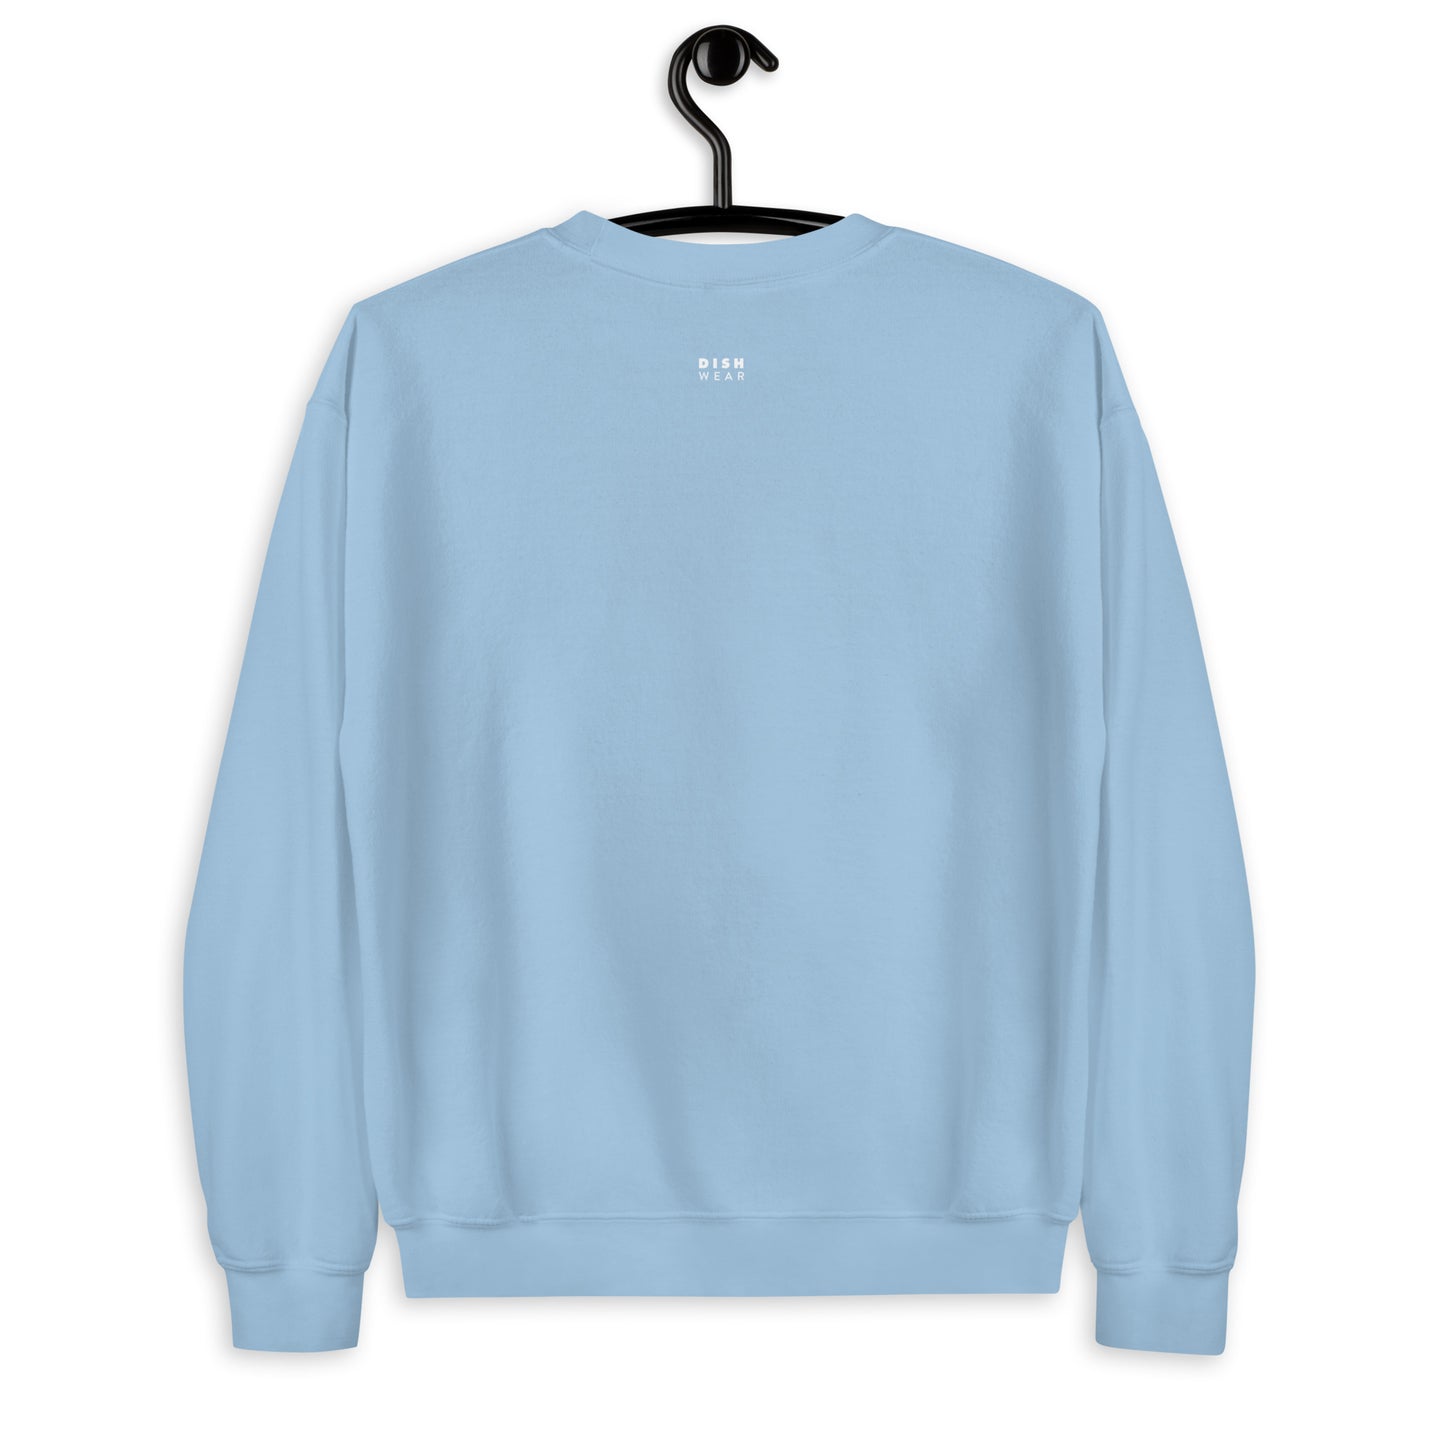 Chocolate Chips Sweatshirt - Arched Font